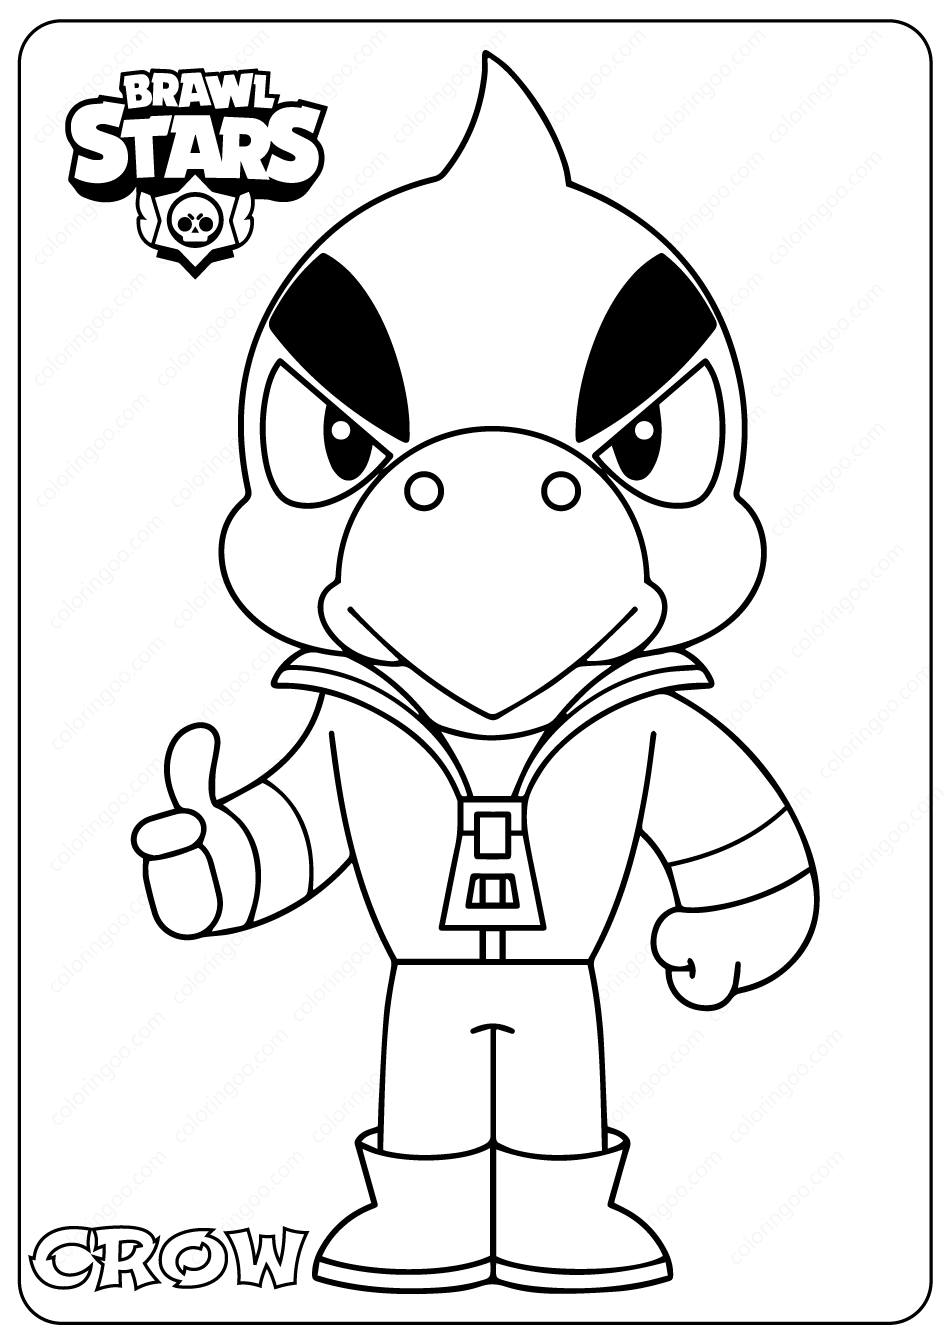 Brawl Stars Coloring Pages - Coloring Home